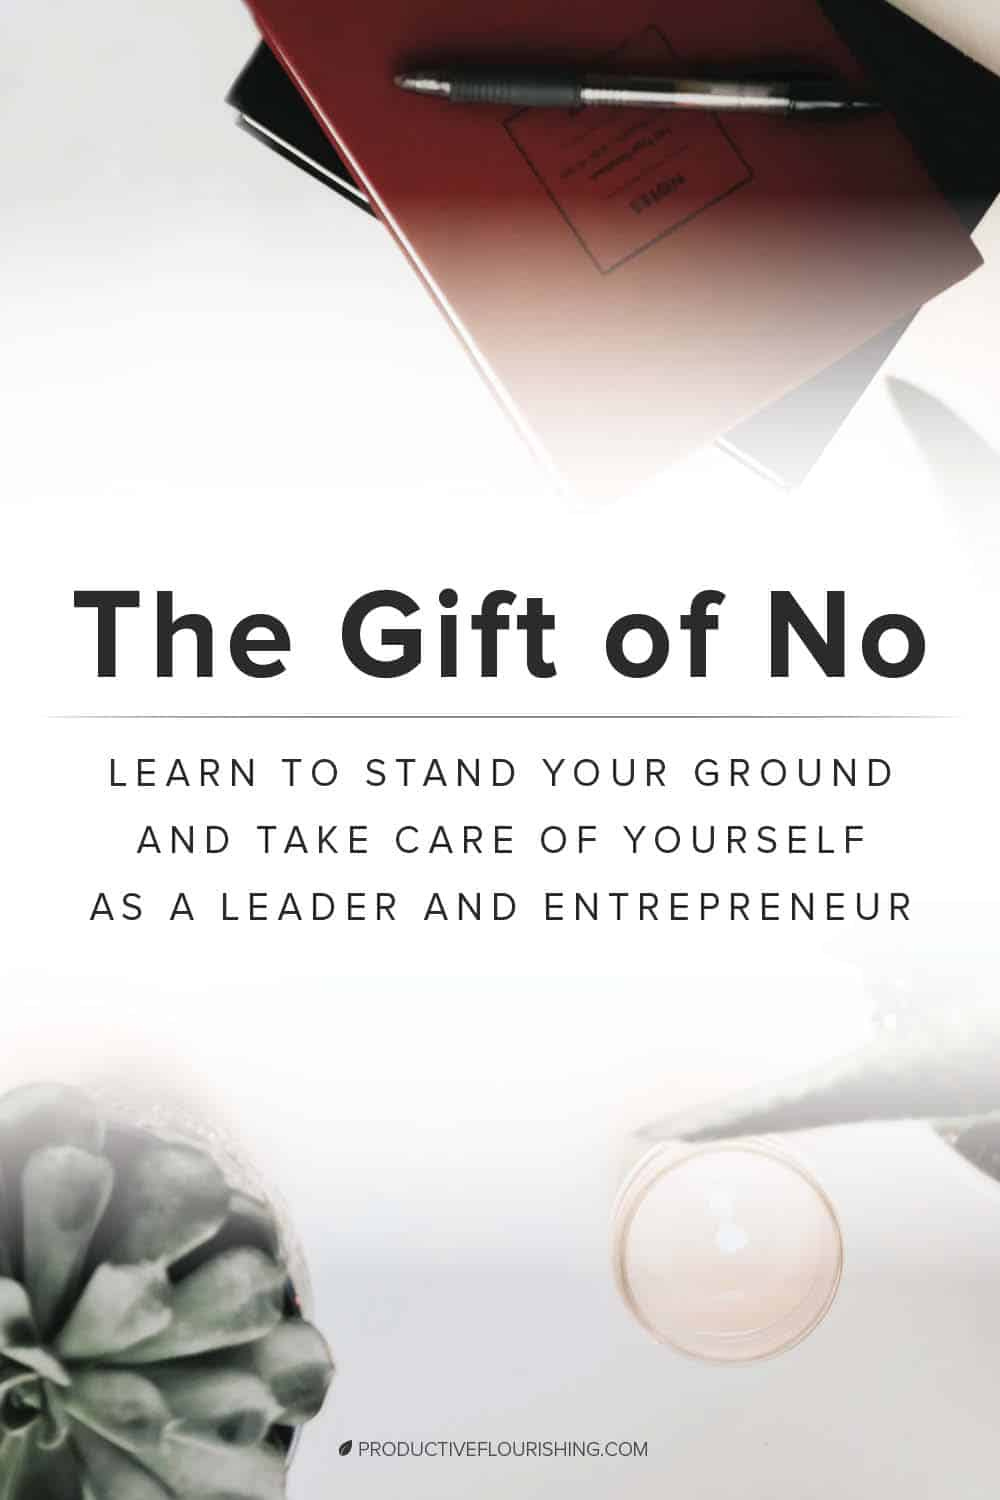 When we get a “no” in response to our requests, a world of possibilities emerges that we could not even imagine beforehand. Learn how to stand your ground, grow as a leader, and what are just a few possibilities that might emerge from that 